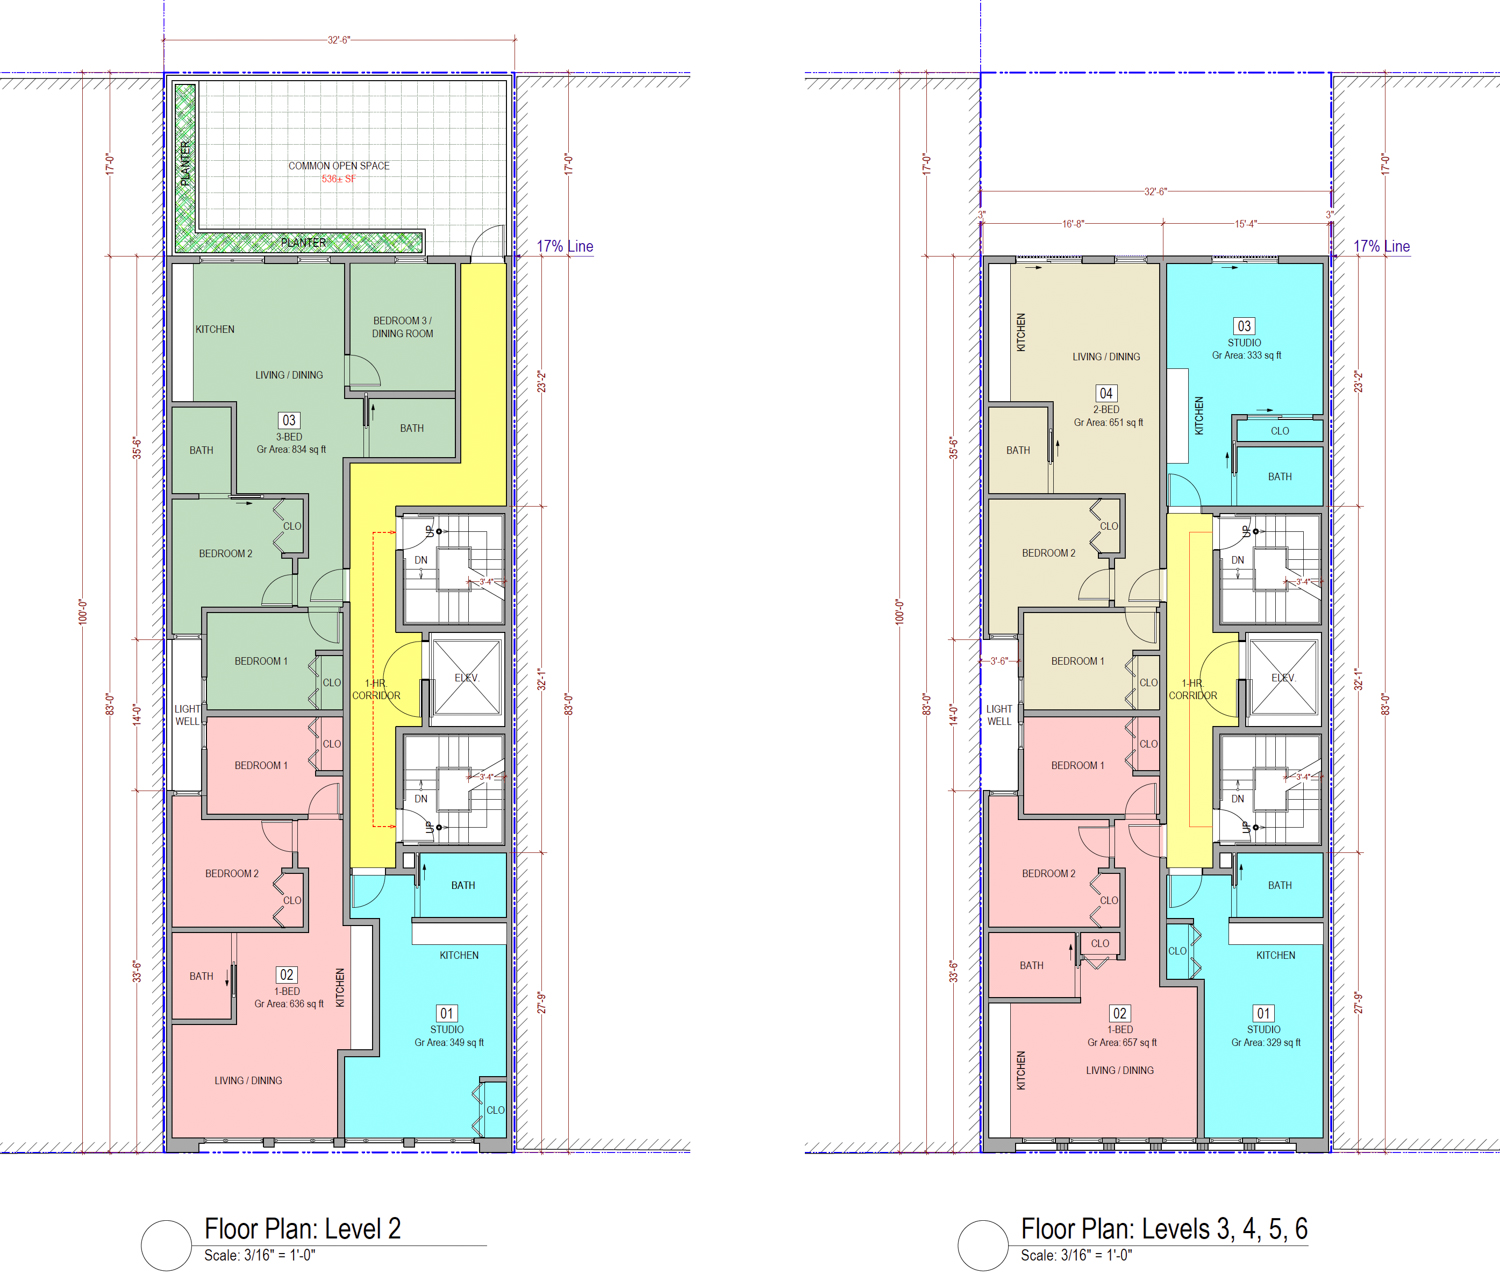 244 9th Street residential-level floor plans, illustration by SIA Consulting